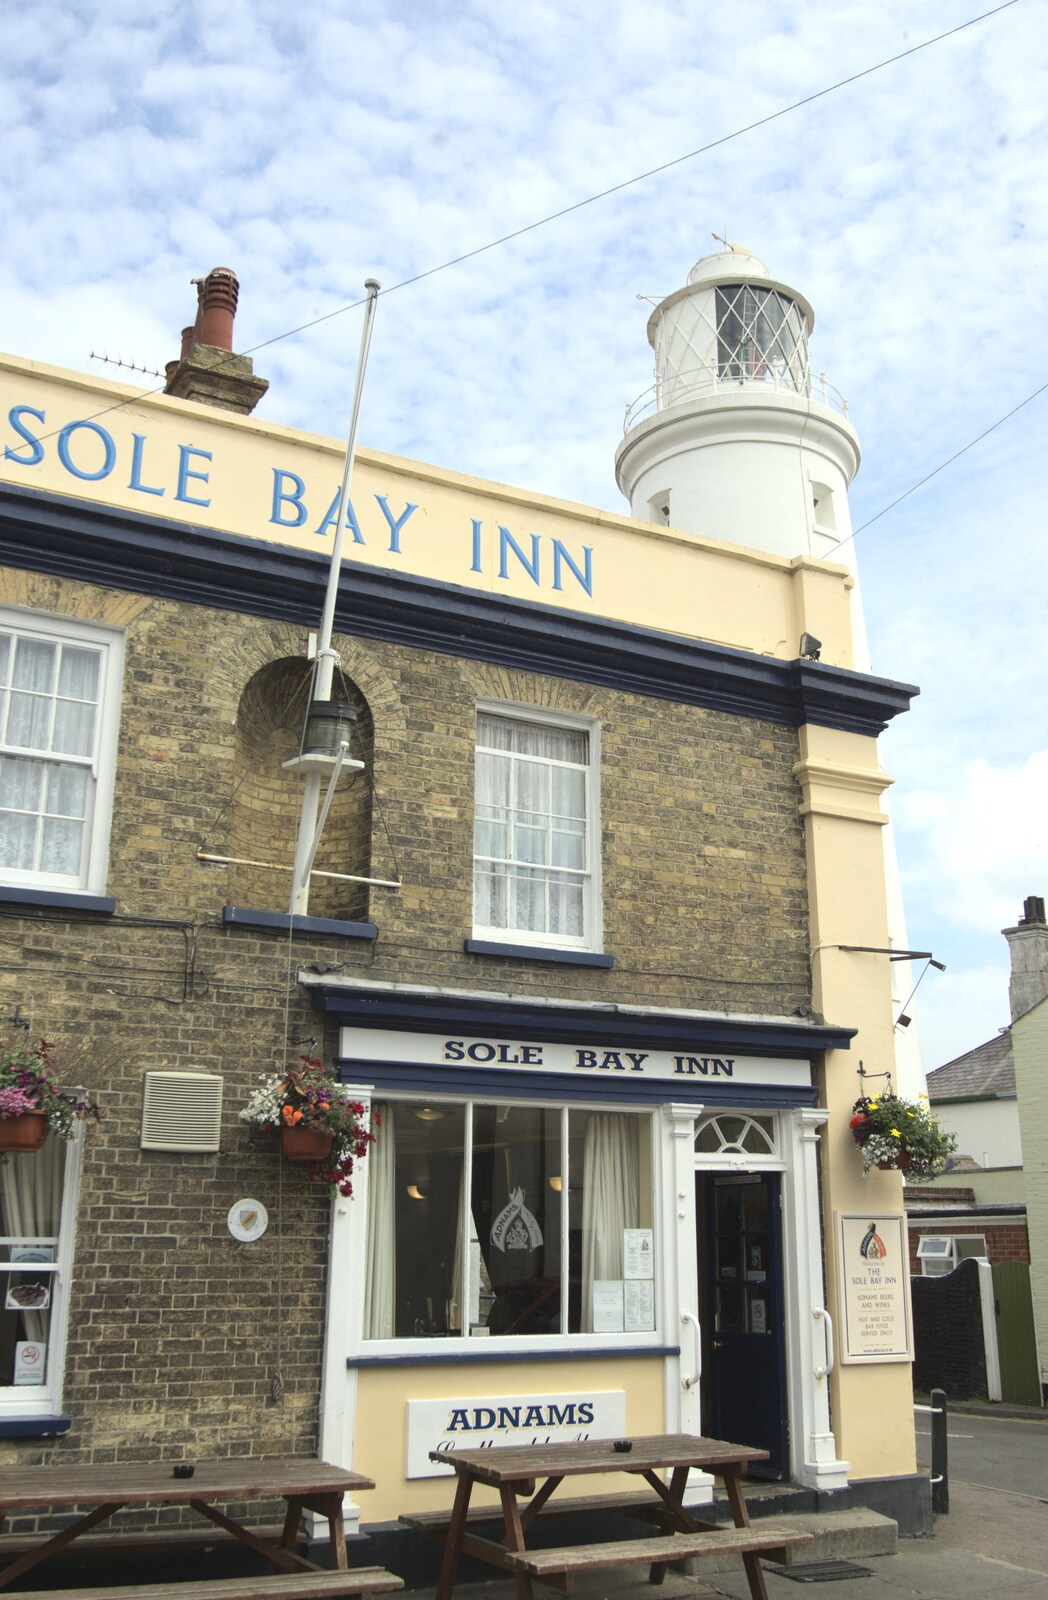 One of our pub stops: the Sole Bay Inn from A "Minimoon" and an Adnams Brewery Trip, Southwold, Suffolk - 7th July 2010